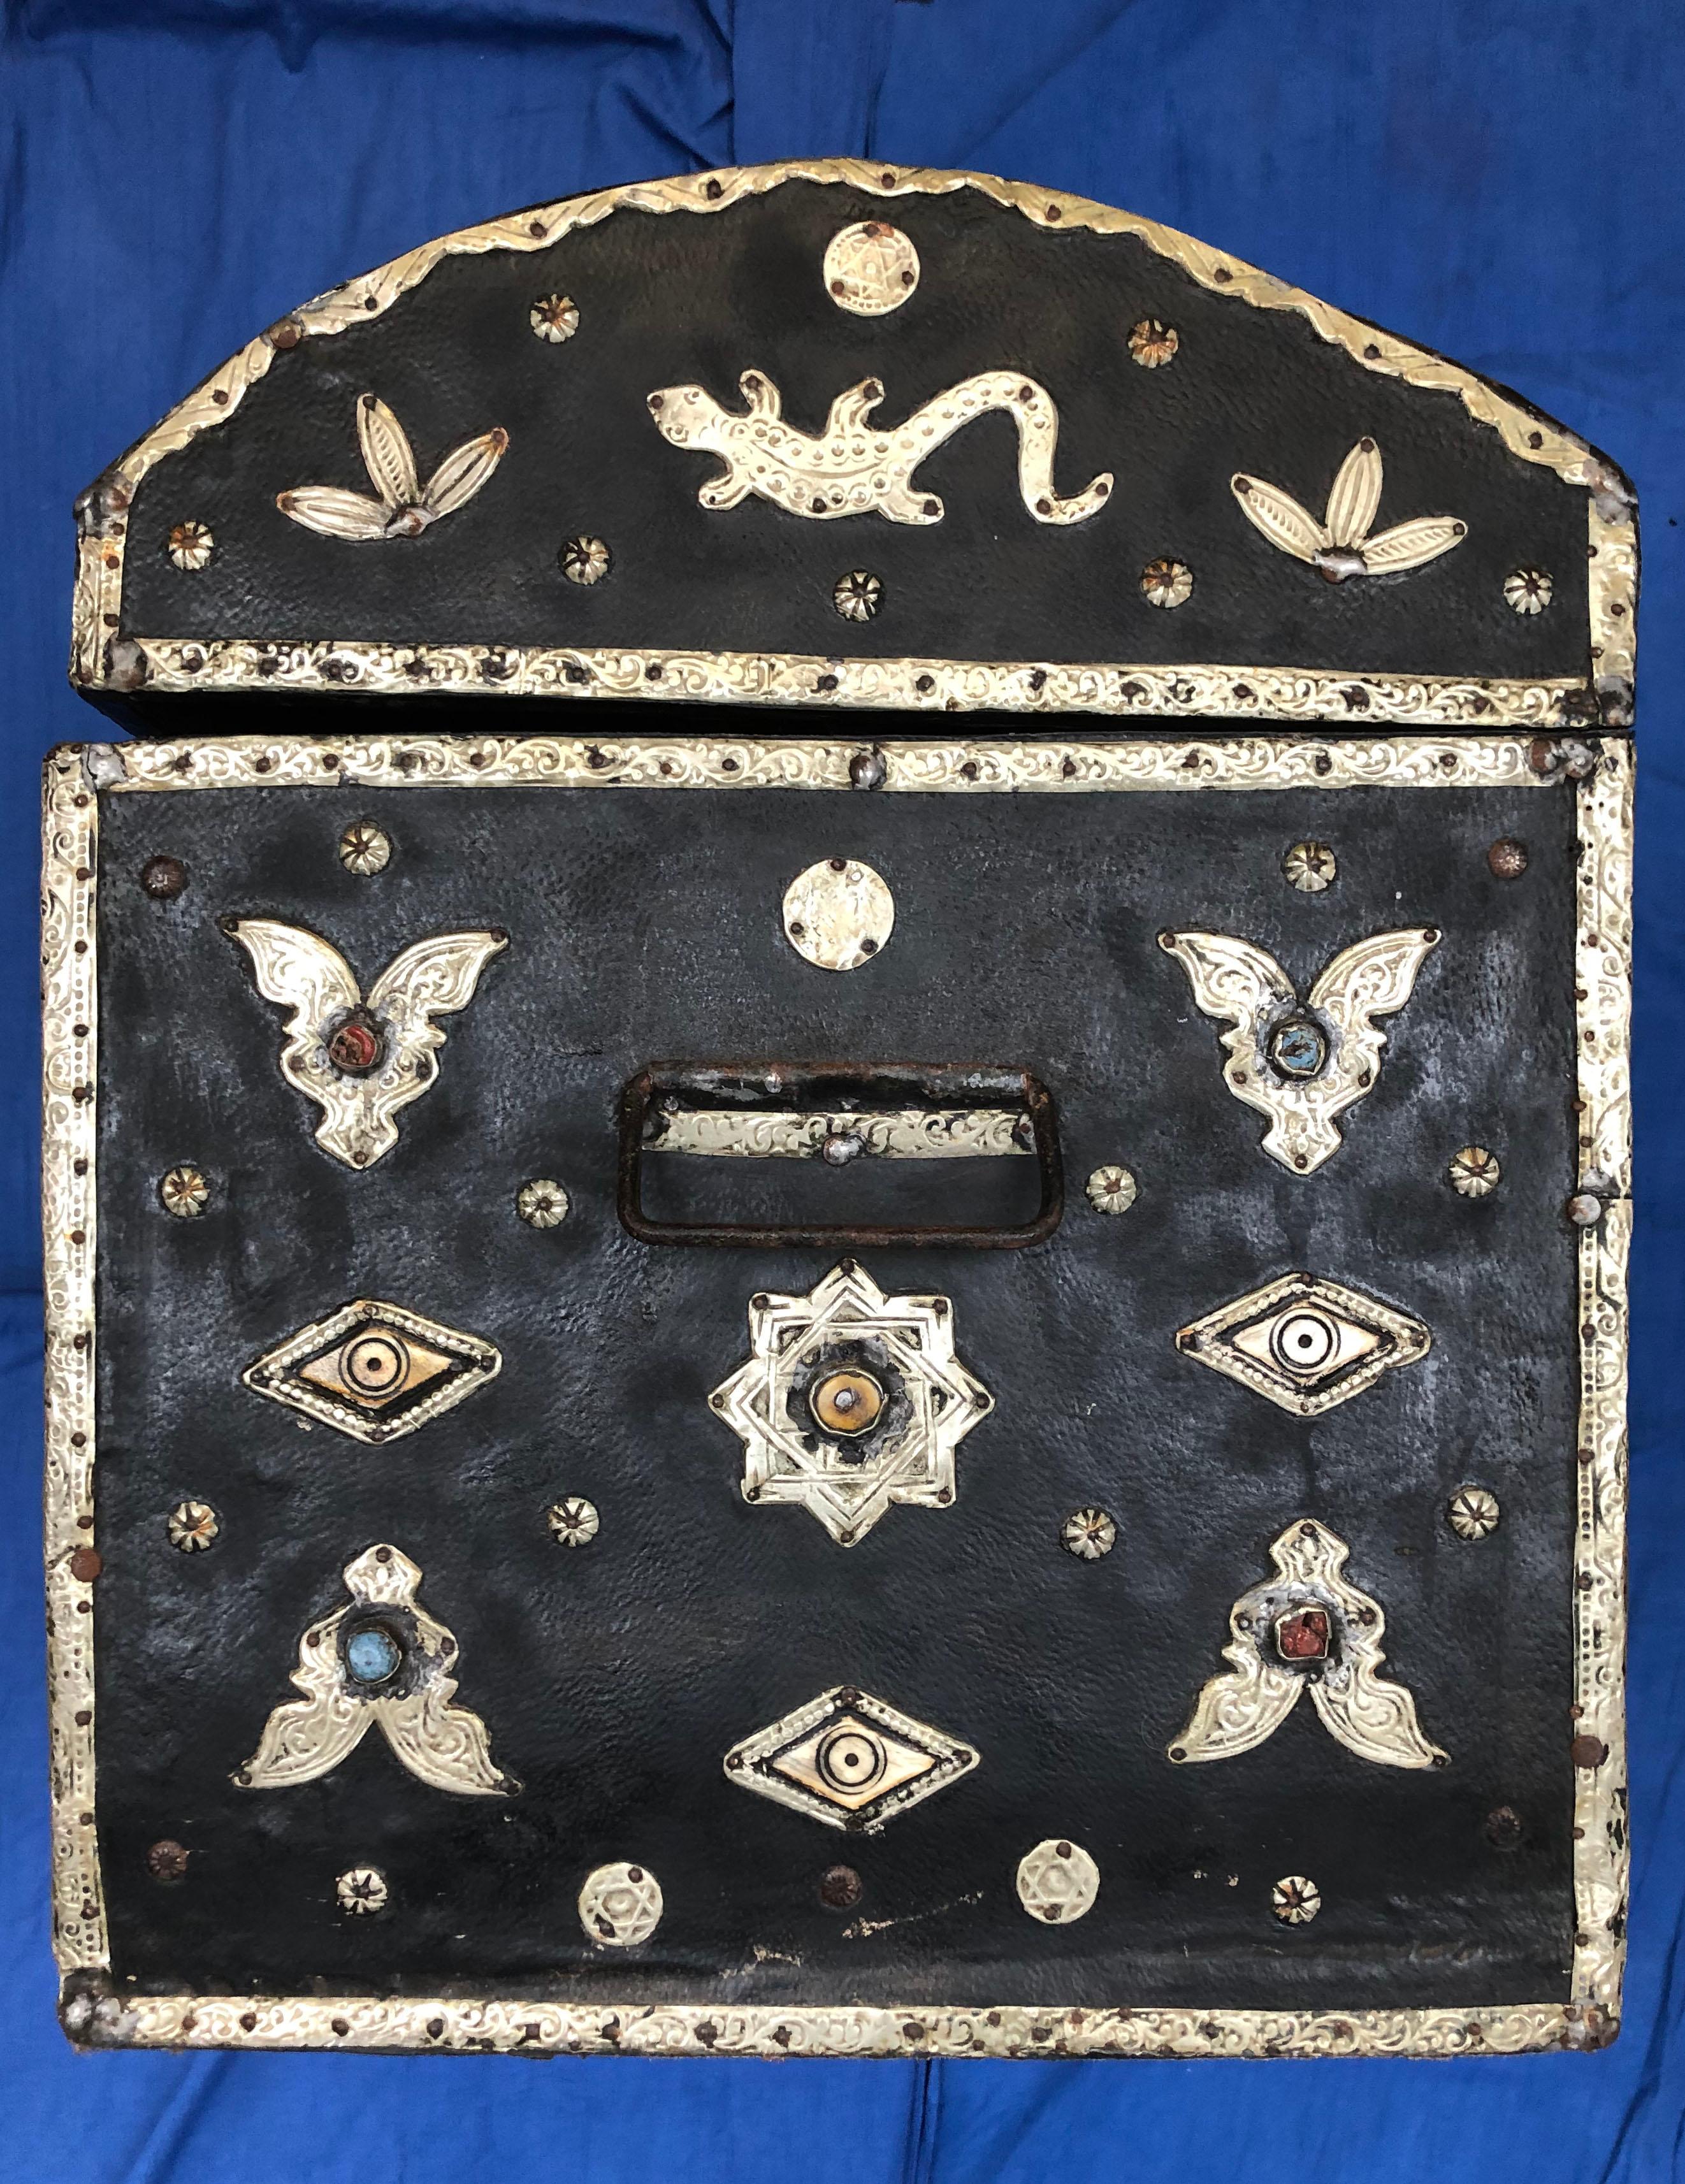 Tribal Early 1900s Moroccan Chest - Leather, Bone, Silver, Gems, Hamsa - Luxe Boho Chic For Sale